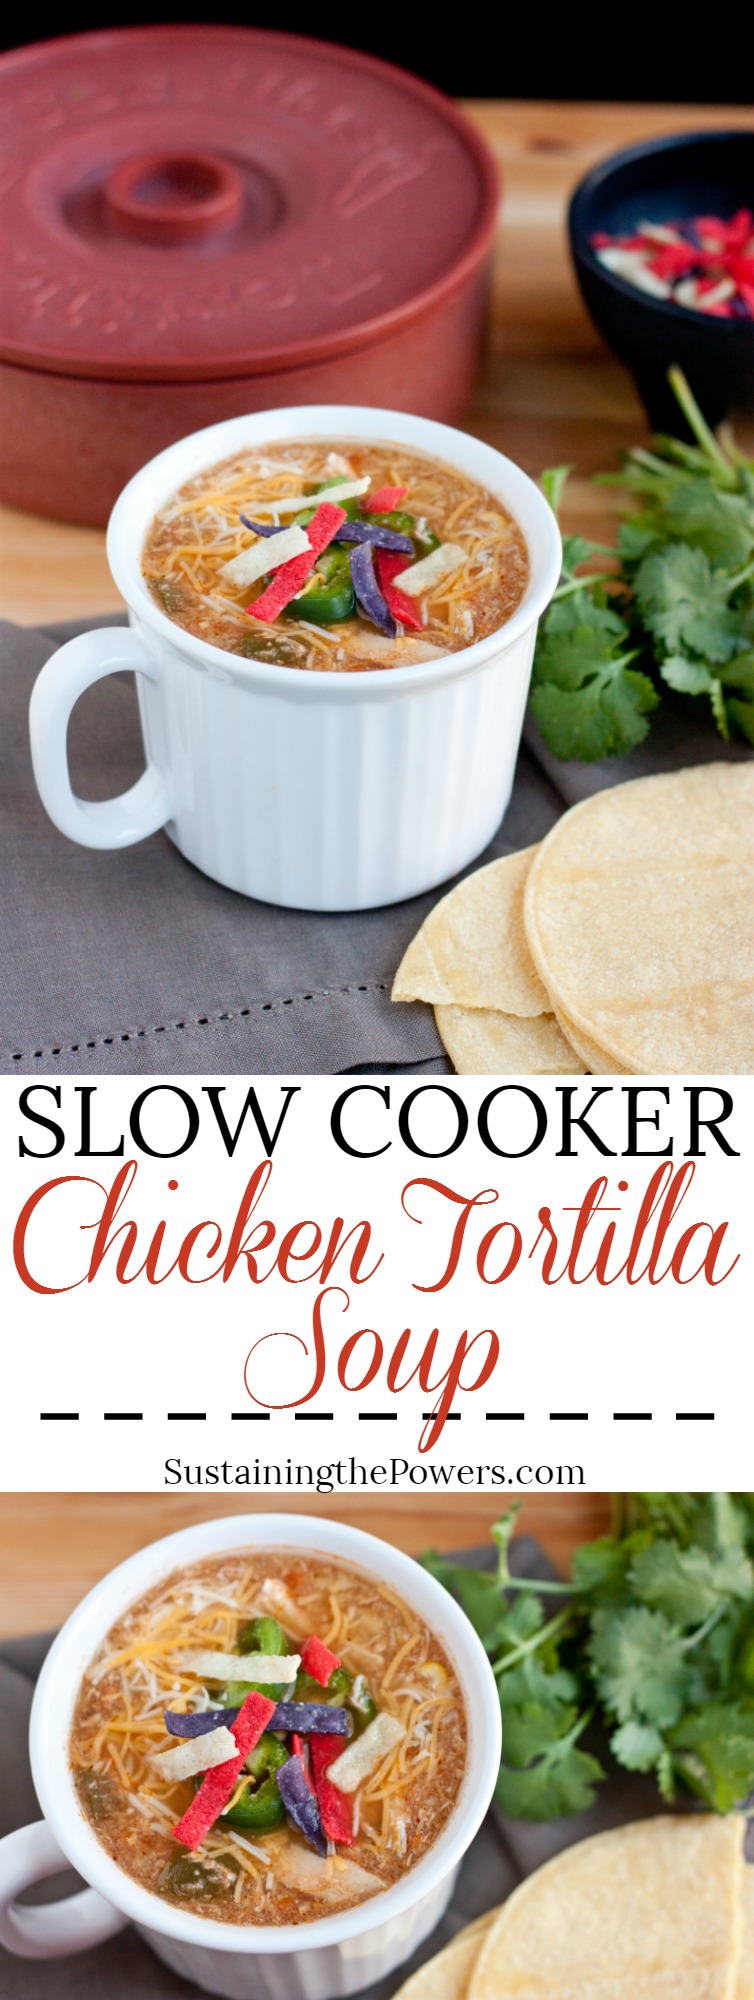 How to Make Slow Cooker Chicken Tortilla Soup | As a Texan, I grew up with this Chicken Tortilla Soup as a staple in our home. My mom would make this with leftover shredded chicken and leave it simmering in the crockpot all day long. The smell still takes me back! Click through to get the easy weeknight recipe. 